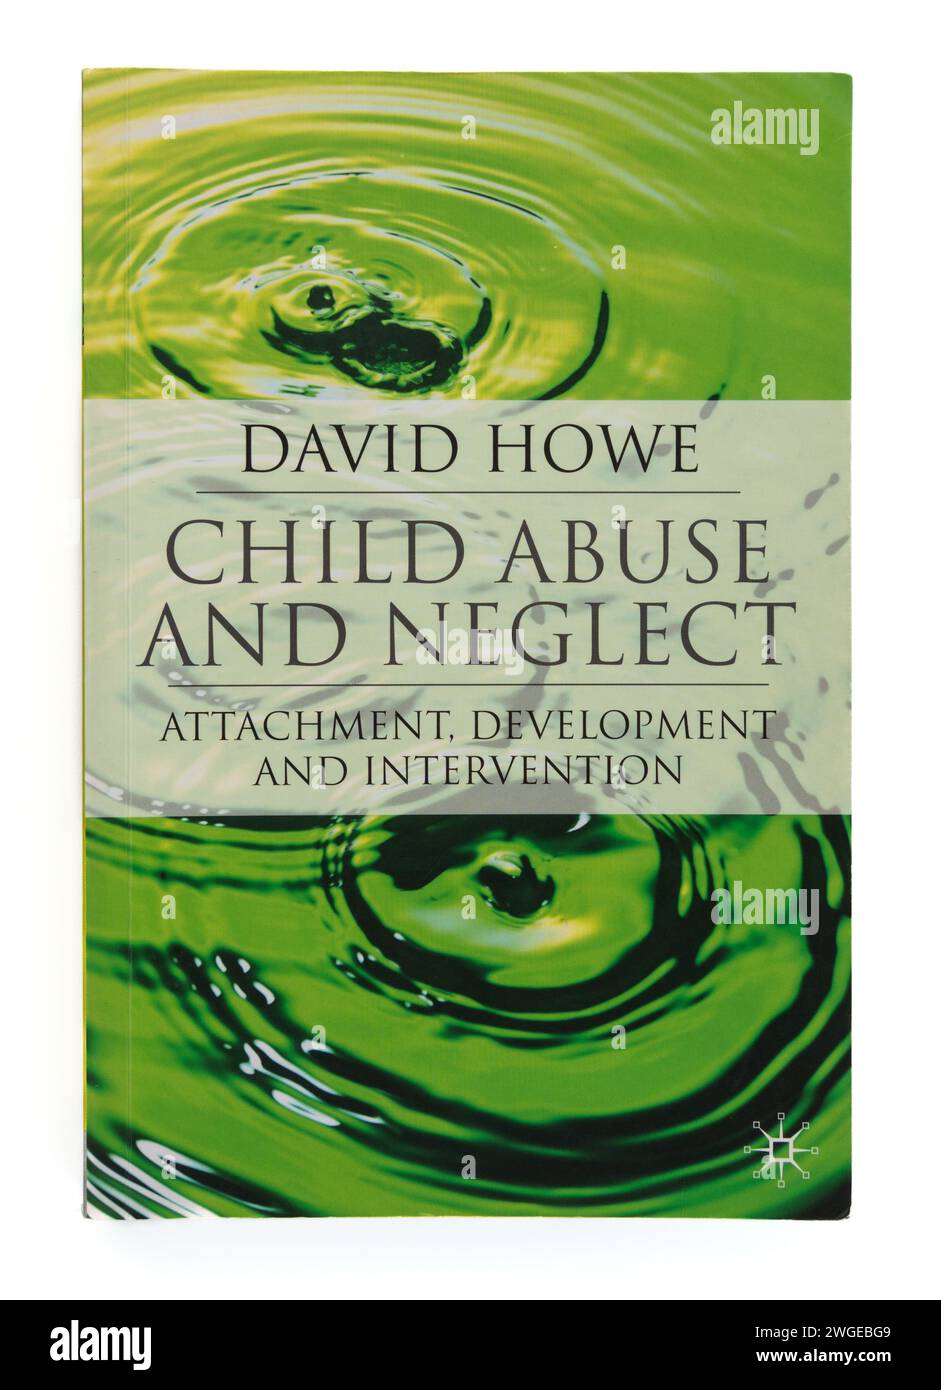 Child Abuse and Neglect Attachment Development and Intervention book by David Howe Stock Photo